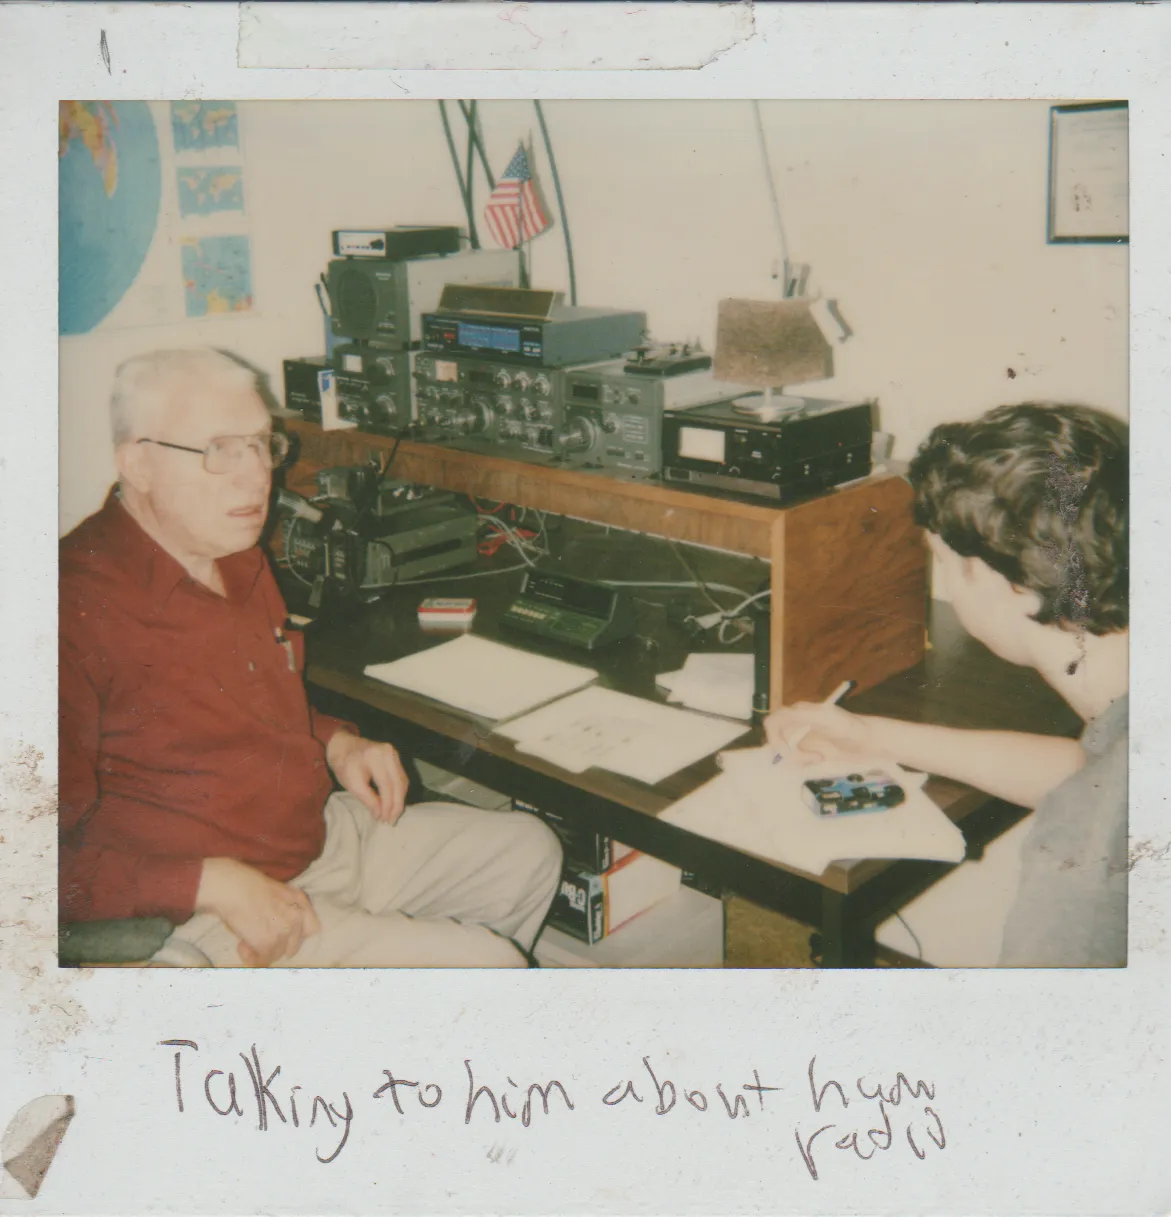 2000-03 - Ham Radio, Rick Arnold Senior Project in High School, talking to him about it, full photo.png